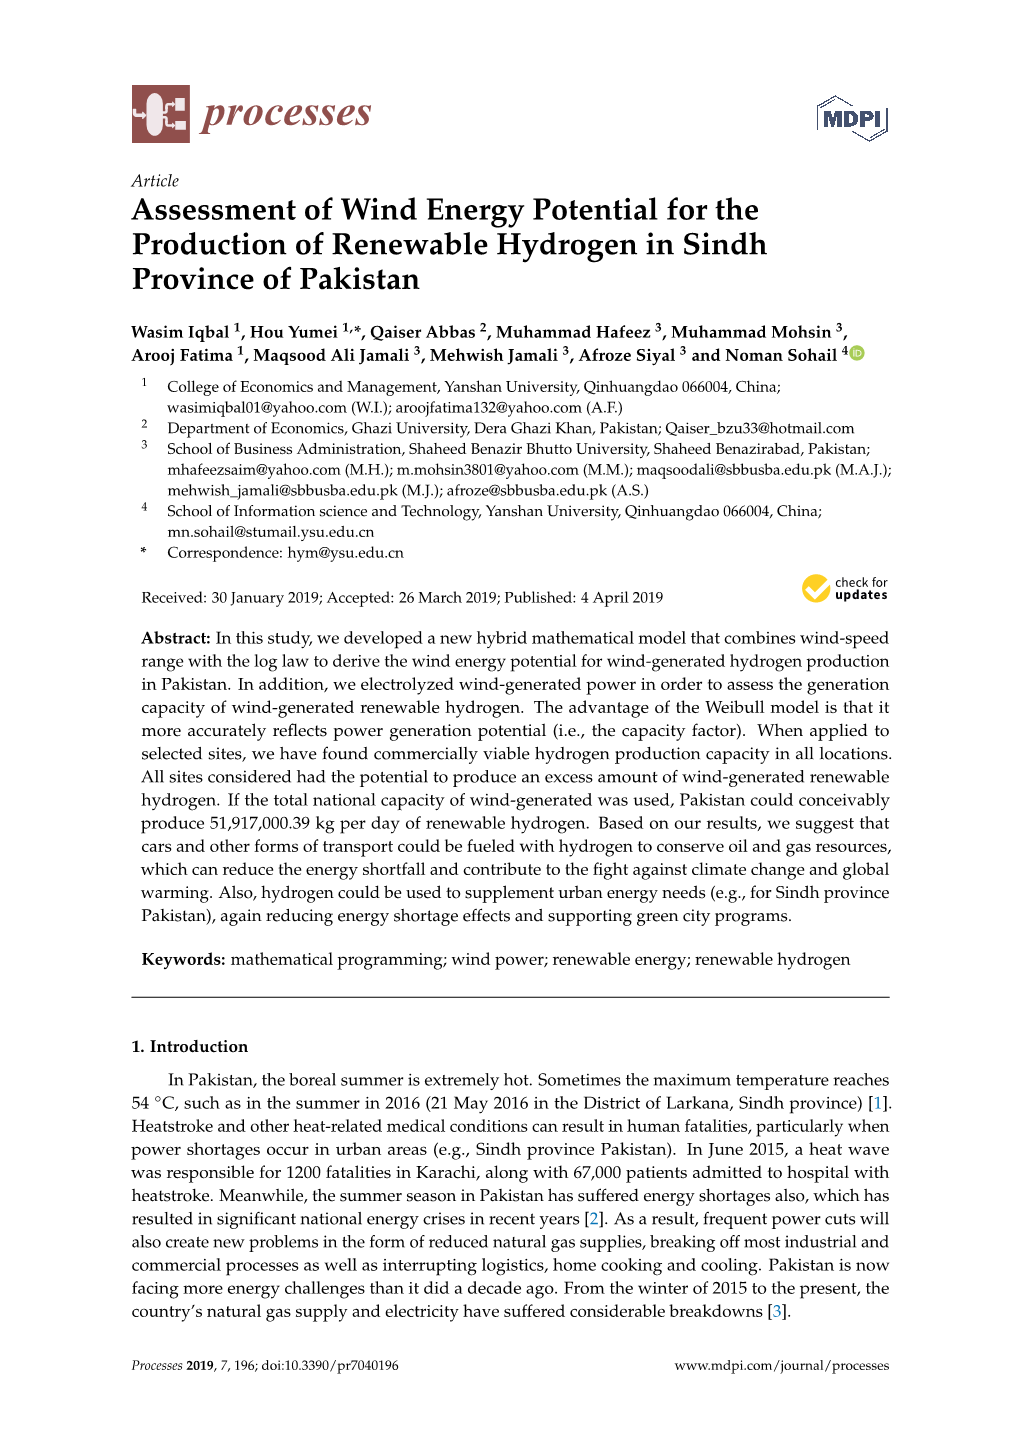 Assessment of Wind Energy Potential for the Production of Renewable Hydrogen in Sindh Province of Pakistan